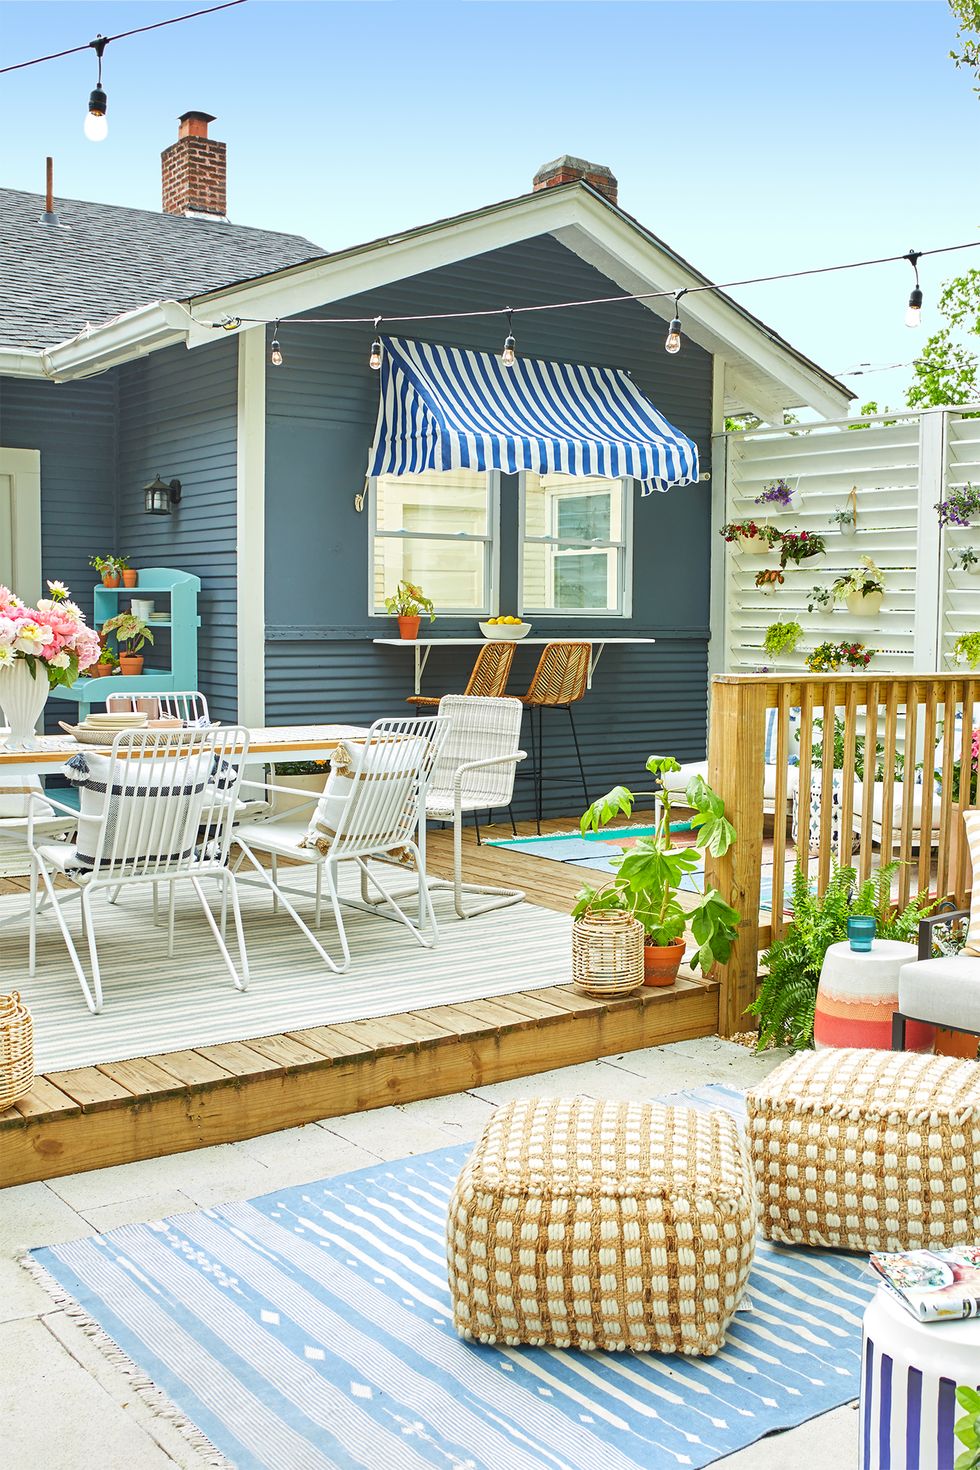 55 Unique Backyard Decor Ideas to Try on a Budget